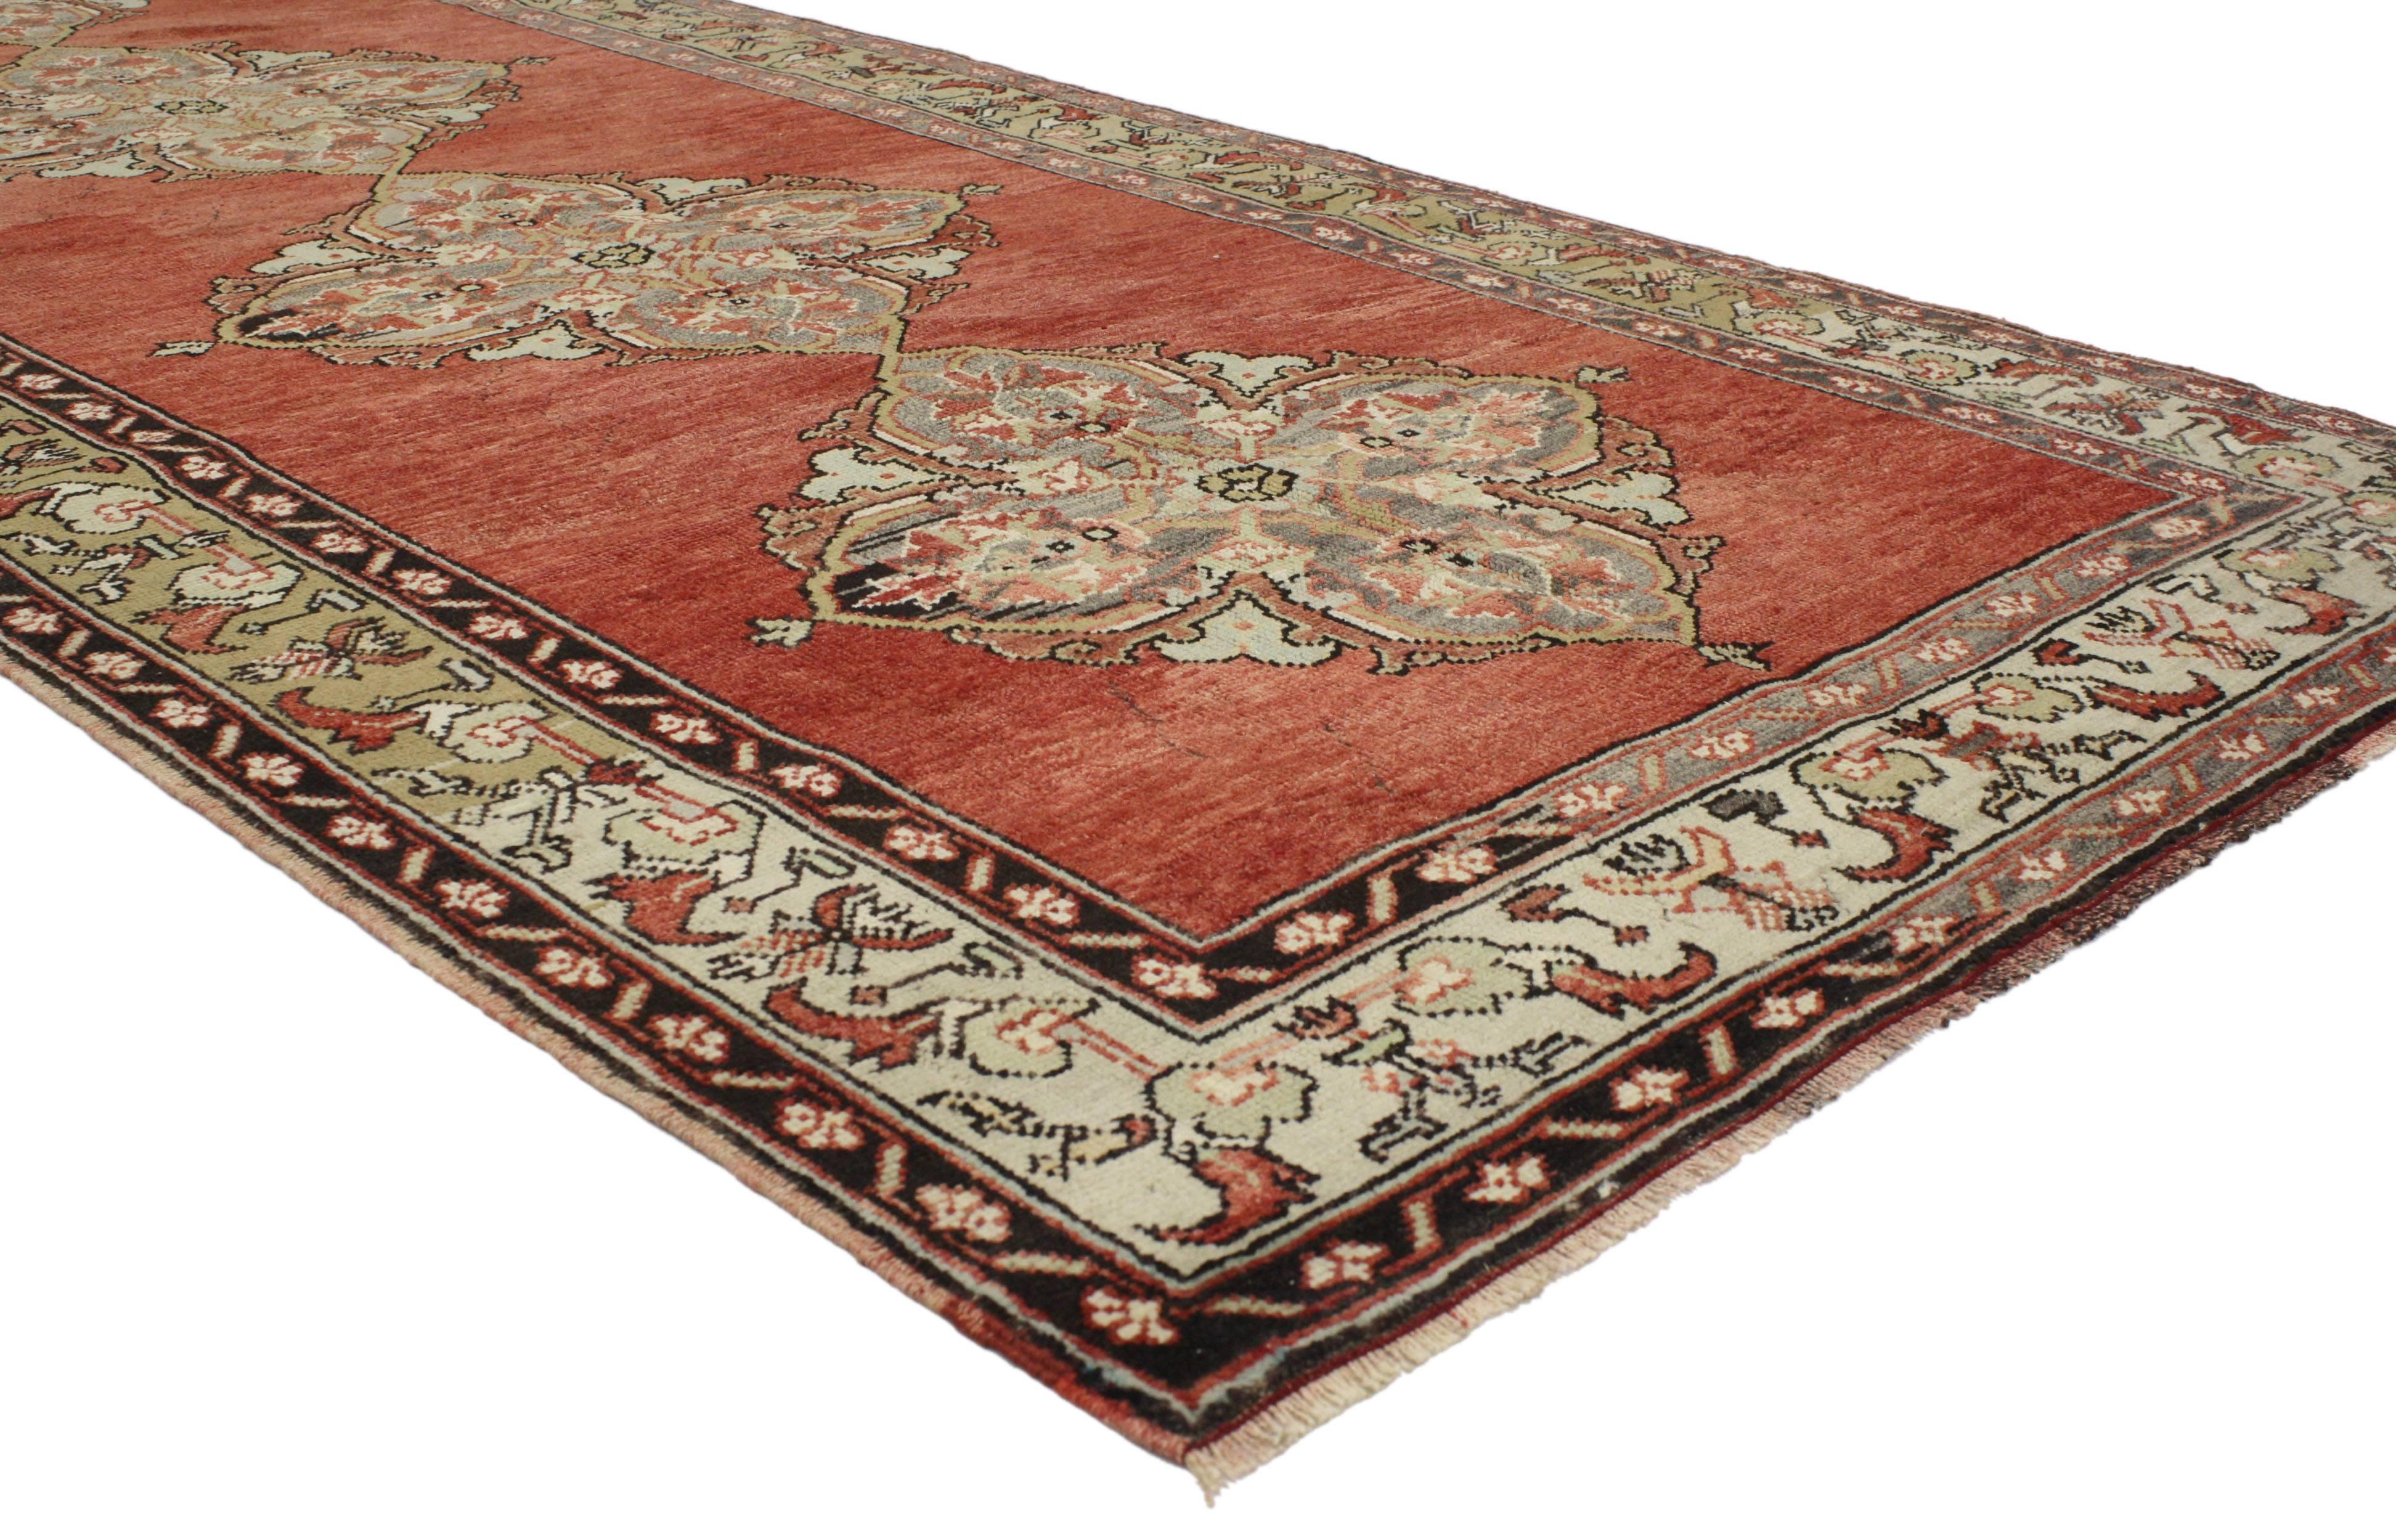 52178 Vintage Turkish Oushak Gallery Rug, Wide Hallway Runner with Traditional Style 04'06 X 10'11. Here is a beautifully composed vintage Turkish Oushak runner with traditional style displaying a Classic design. Featuring four stacked medallions in